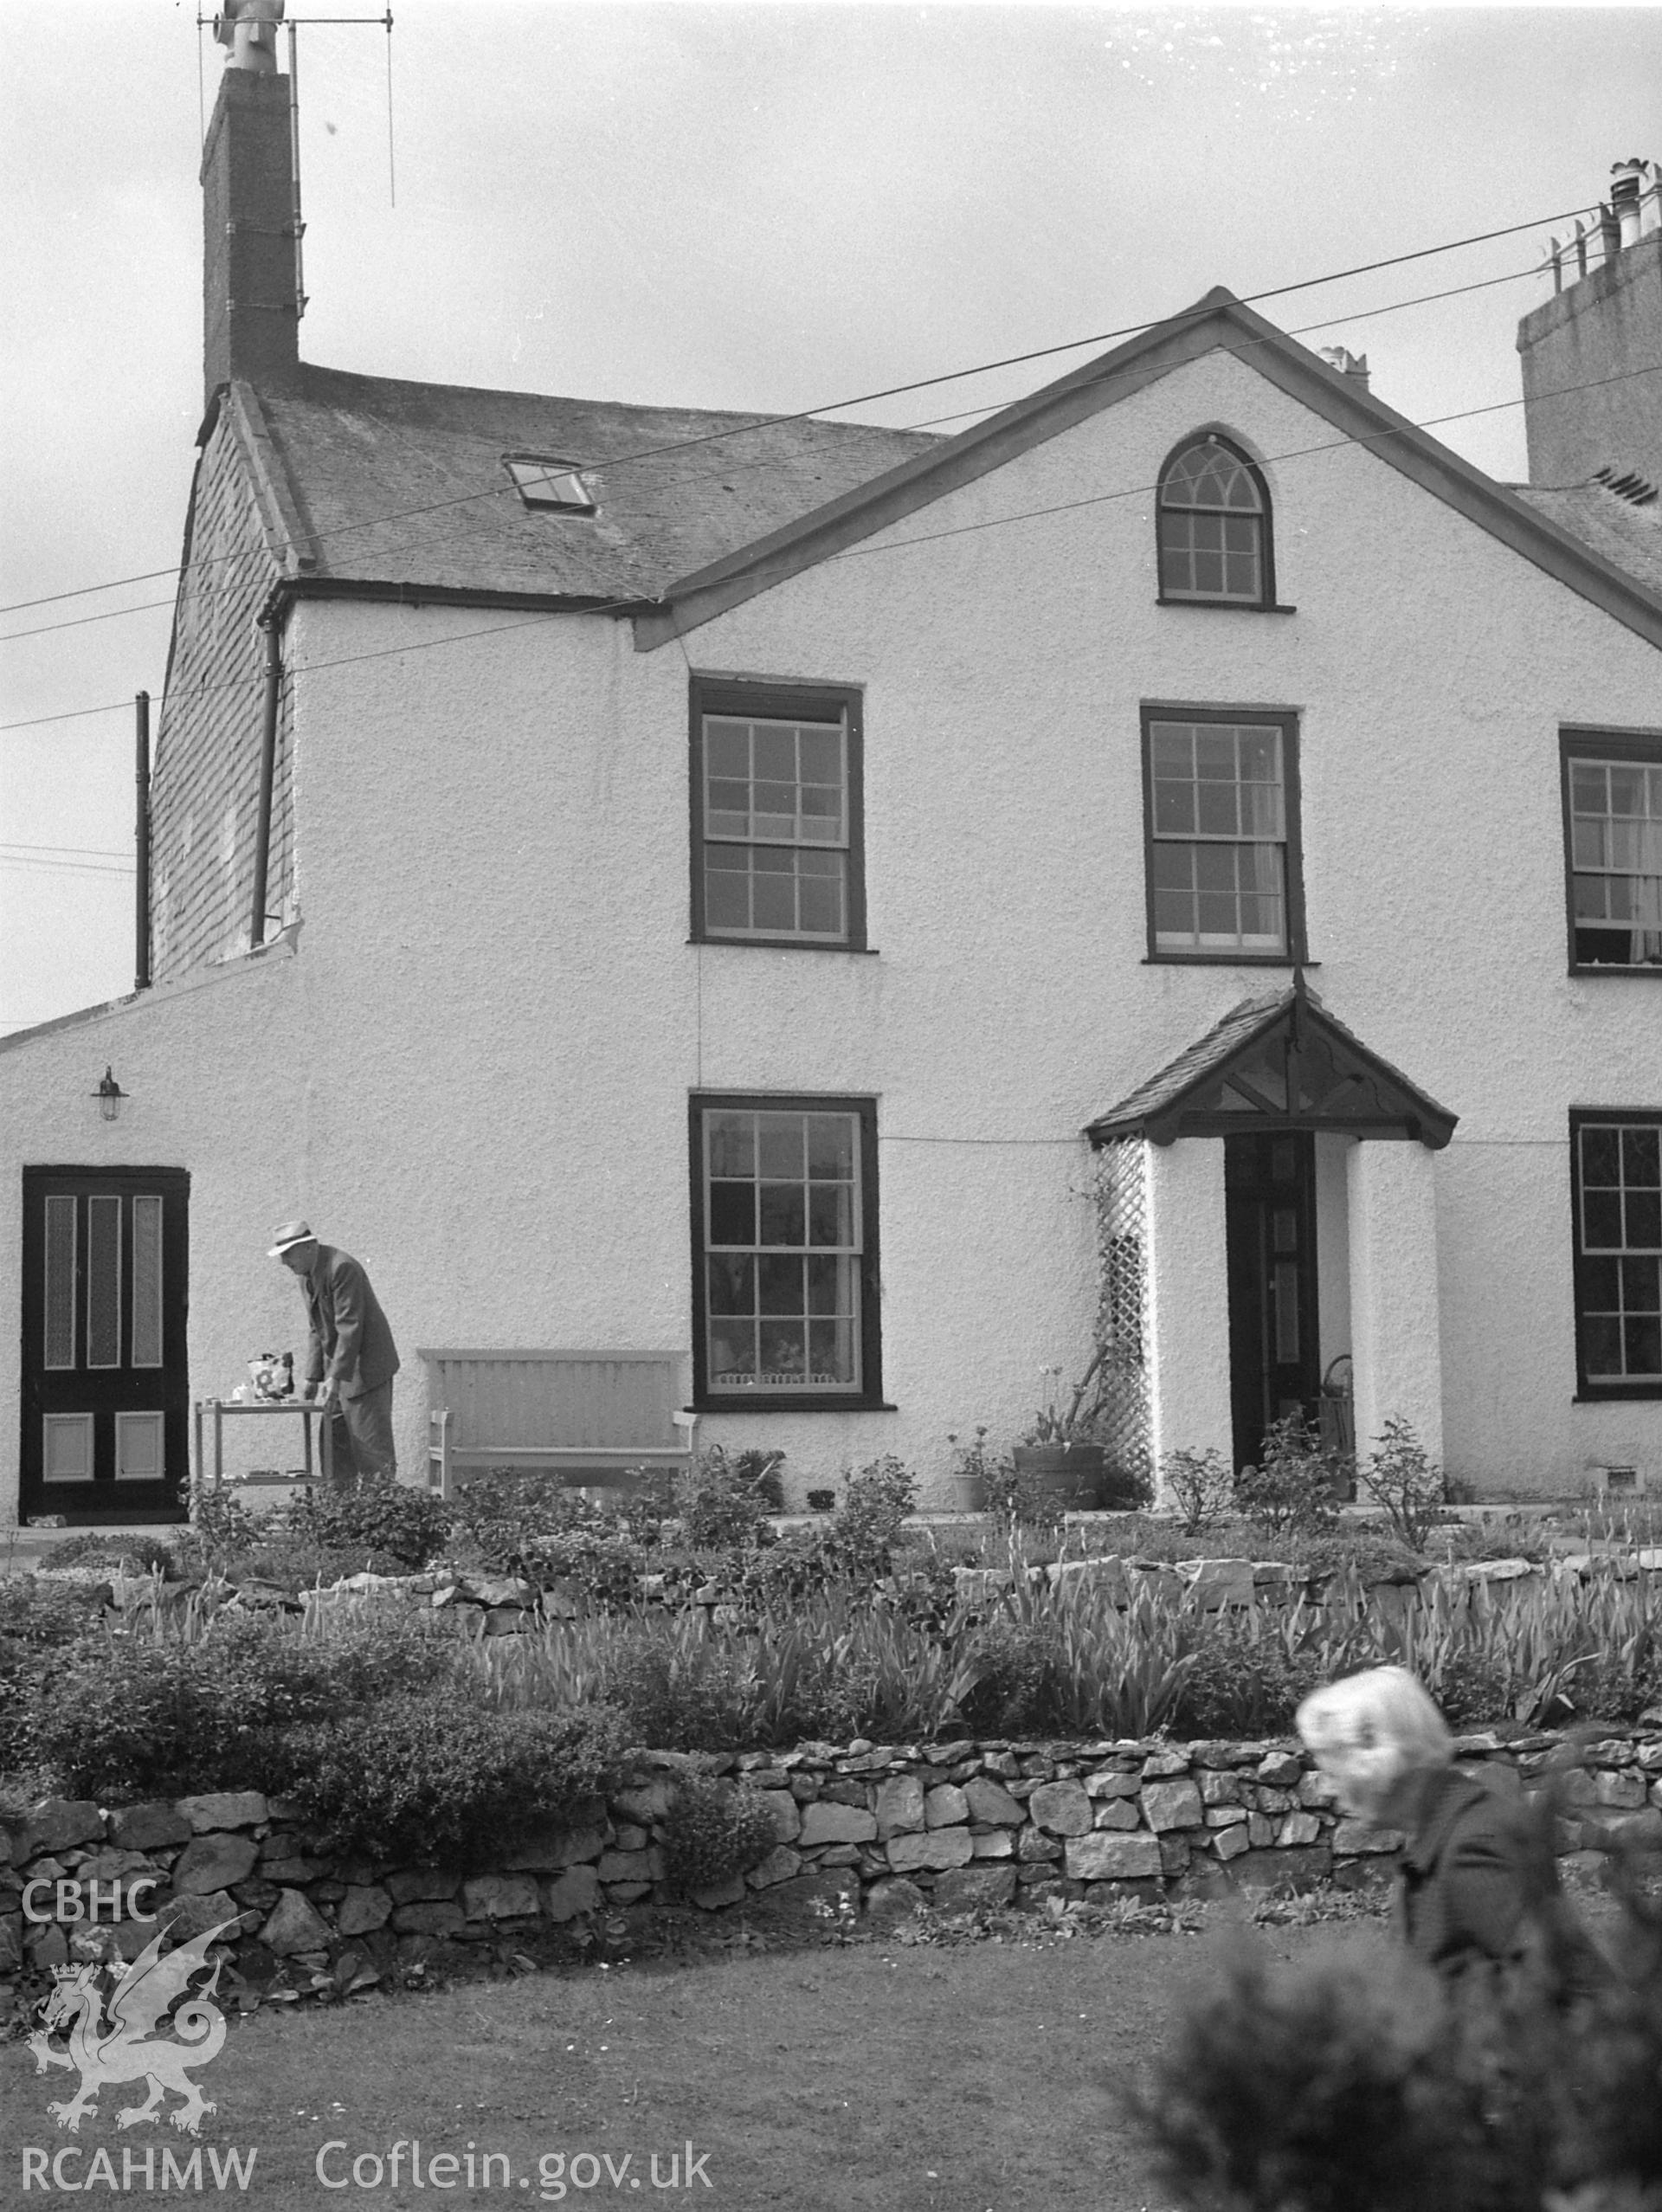 Black and white photograph of The Hermitage, Beaumaris, and brief note concerning alteration proposals.